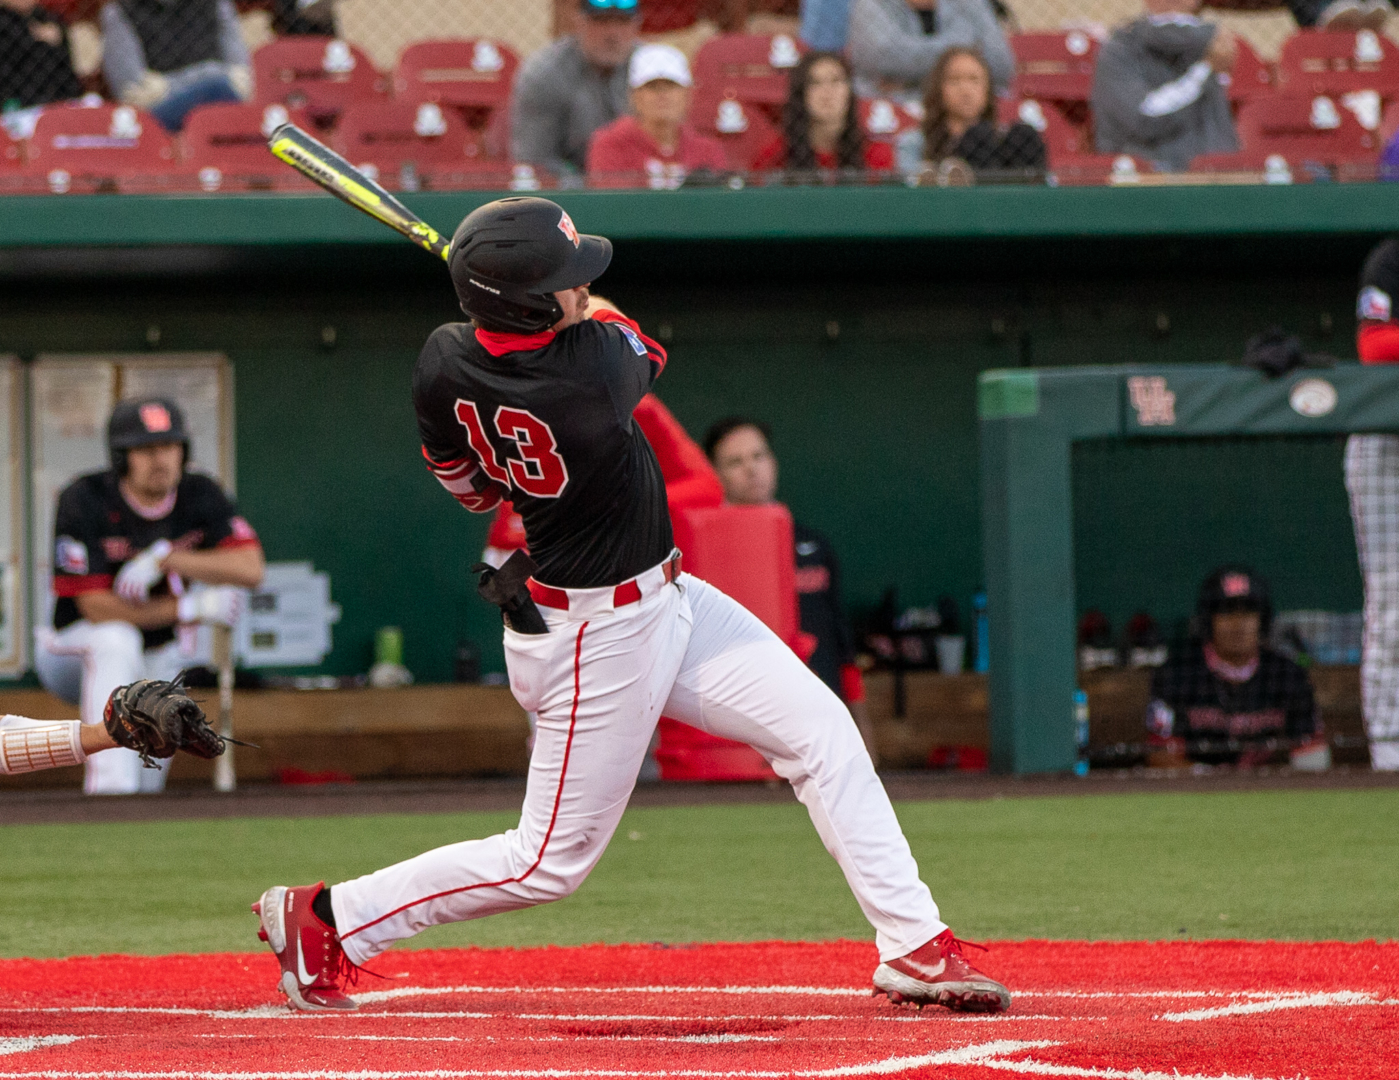 Senior outfielder Tyler Bielamowicz walks it off with a solo home run to power UH baseball to a 3-2 victory over No. 19 Texas Saturday afternoon | Andy Yanez/The Cougar